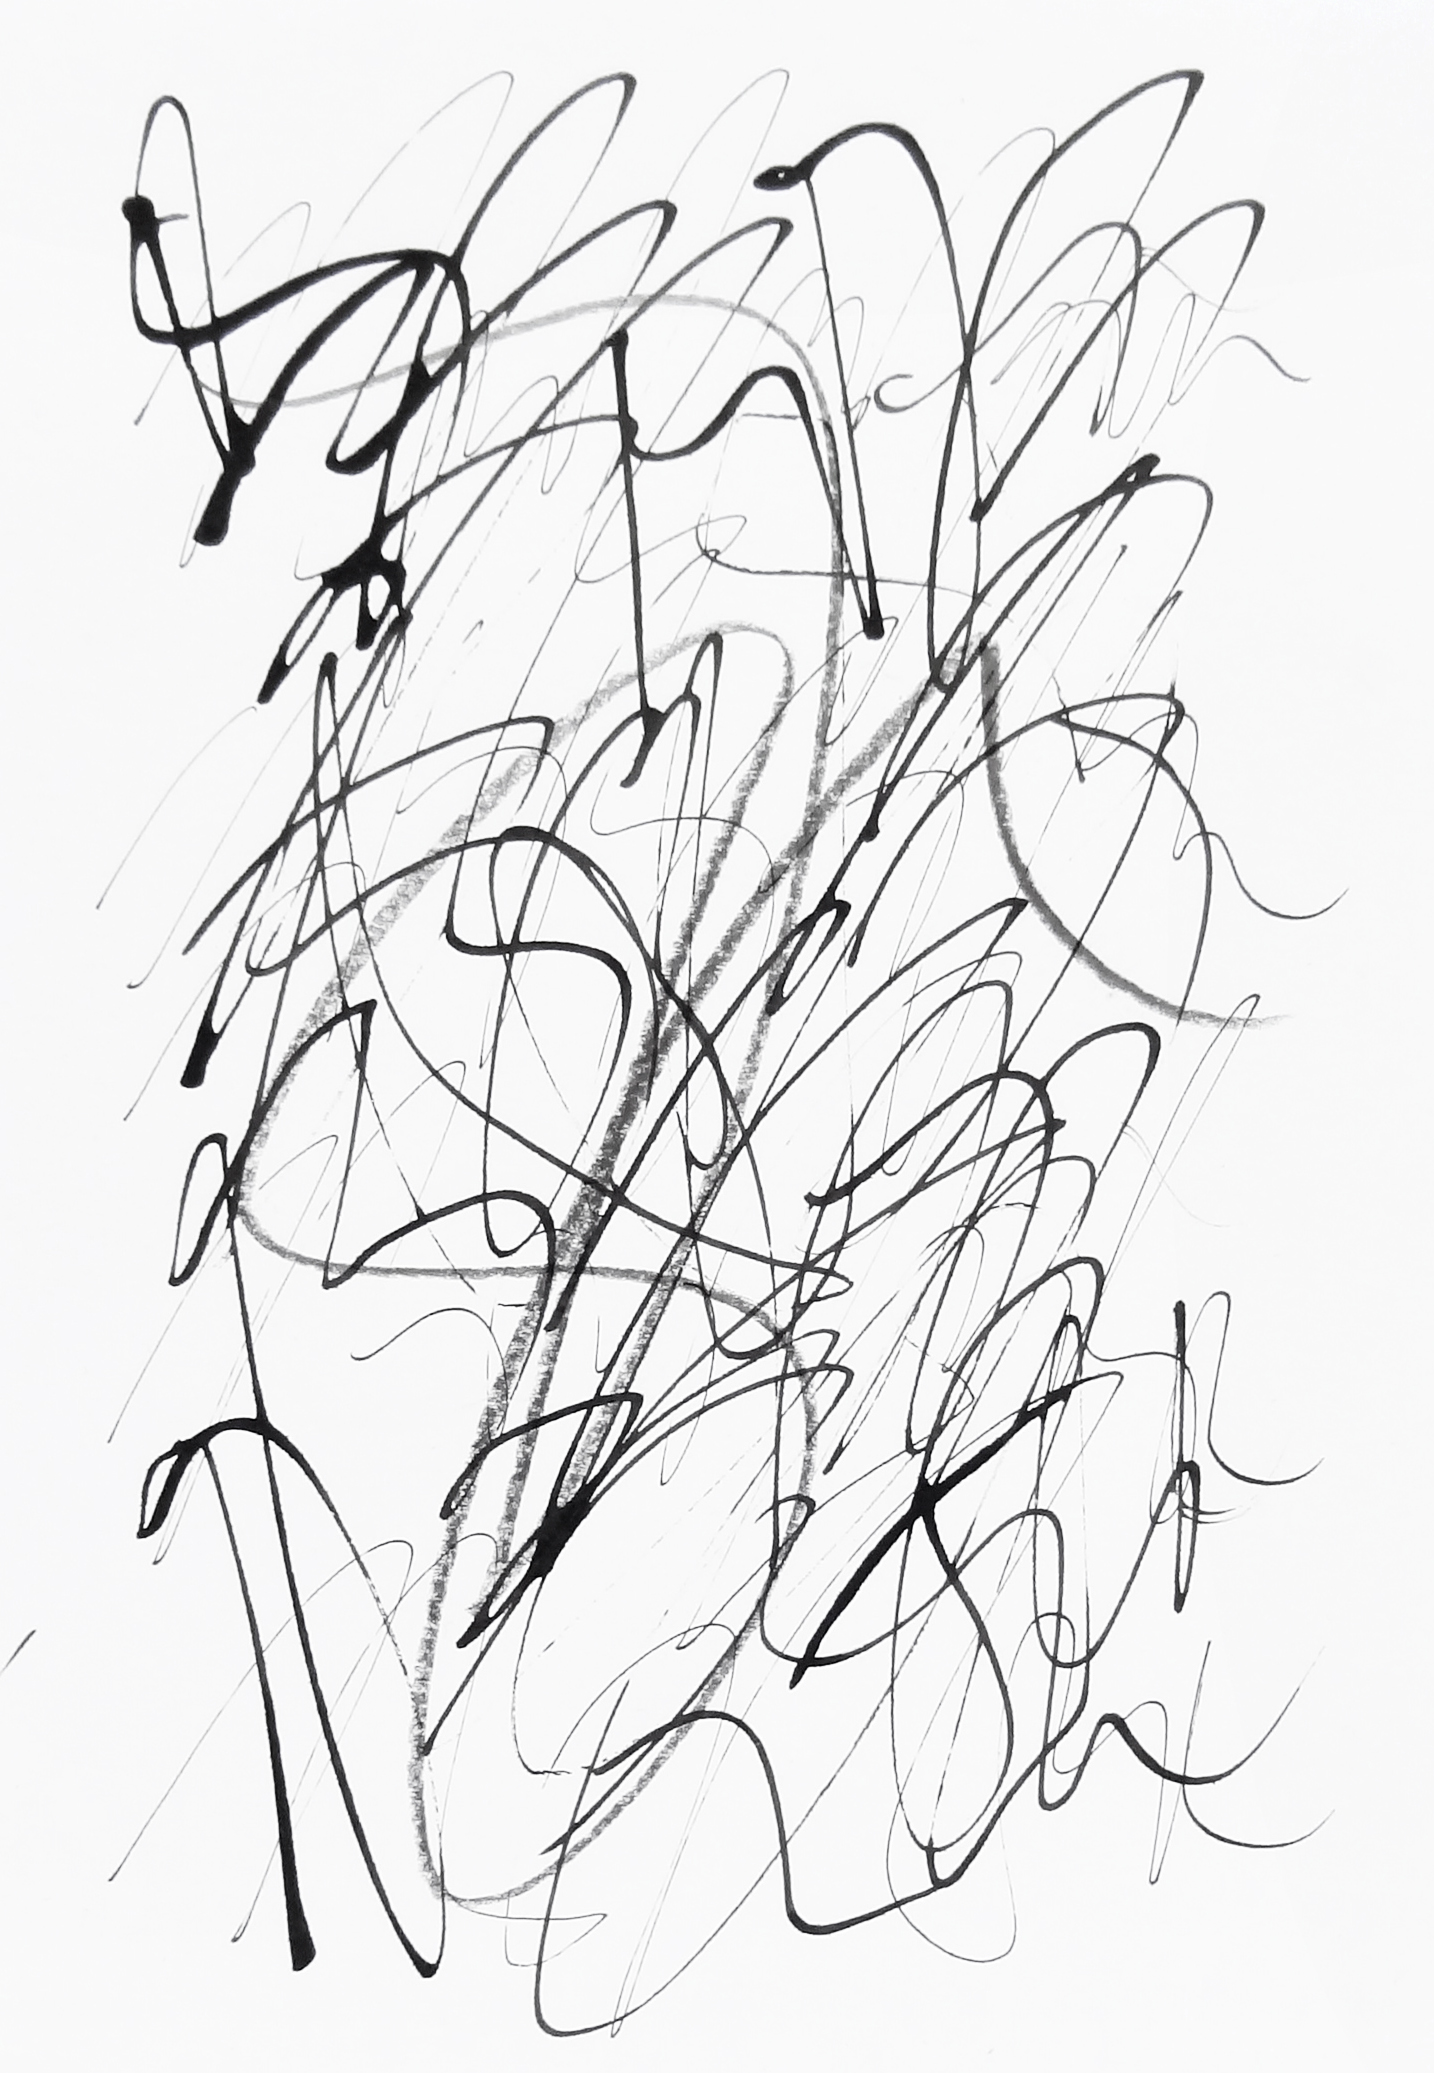  rhythm and flow studies, 2019 calligraphy ink and pencil on paper 42,0 x 29,7 cm (18-19) 